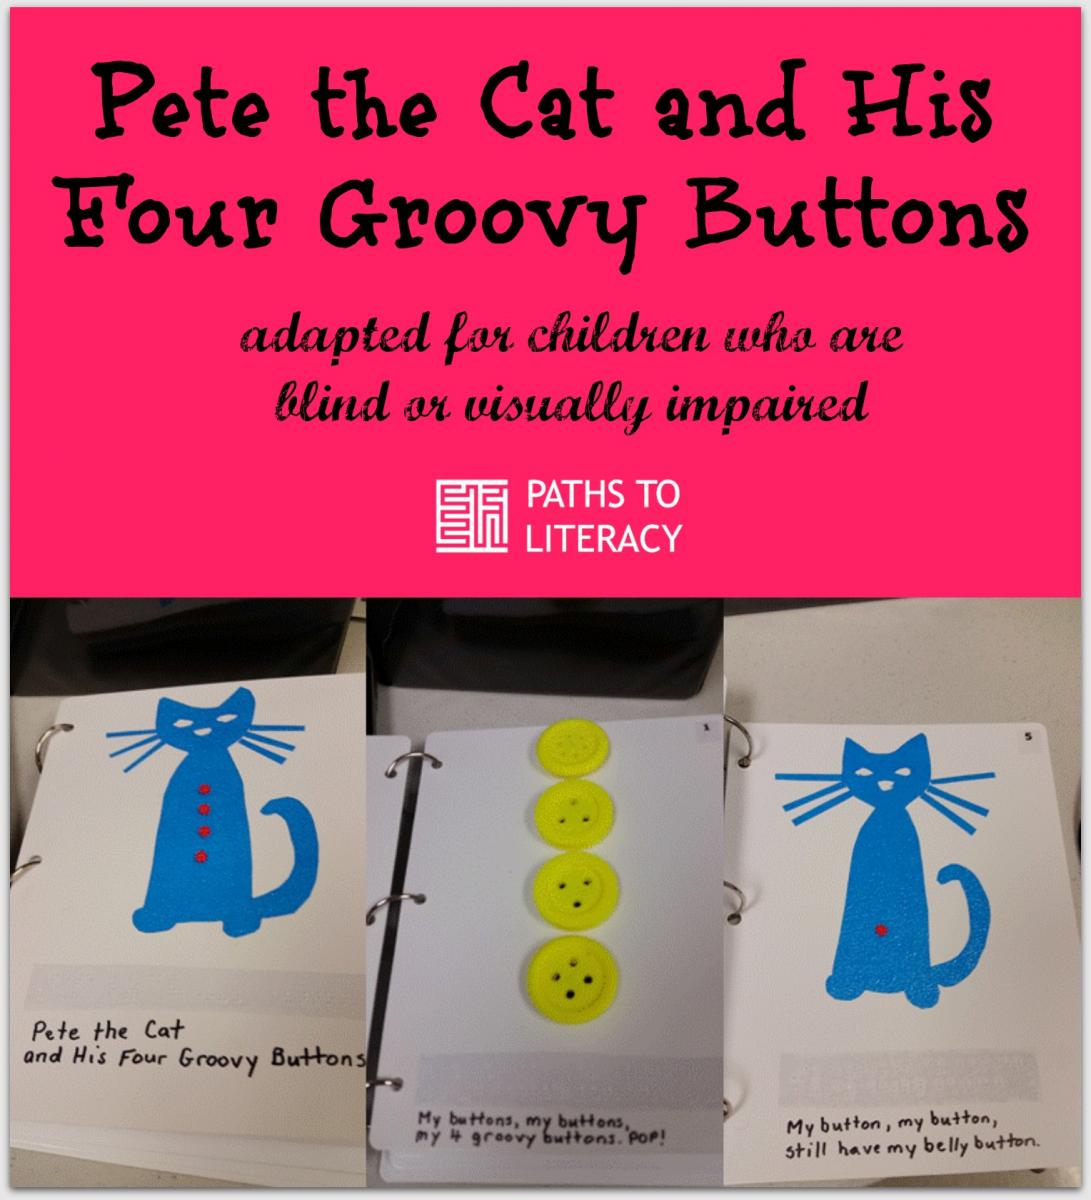 Pete the Cat collage